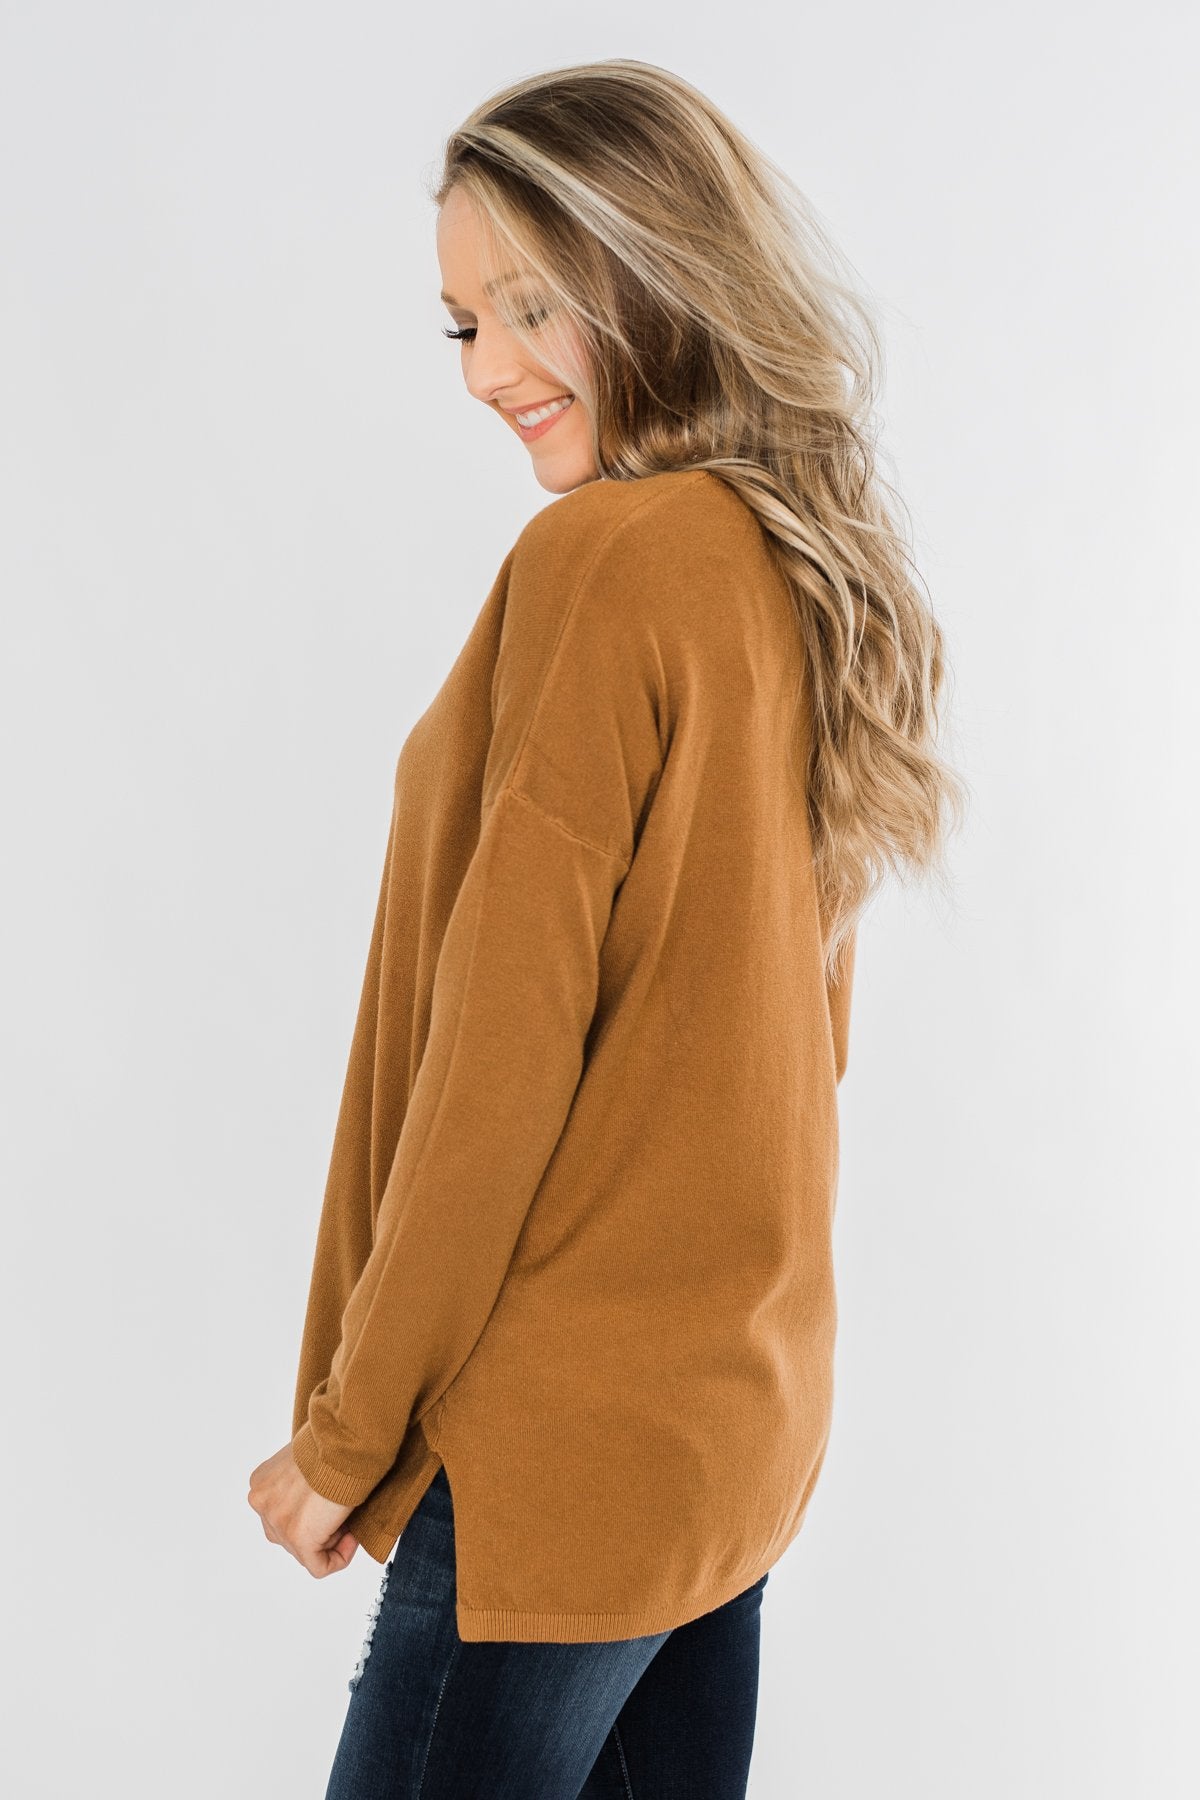 Truly Yours Sweater- Dark Camel